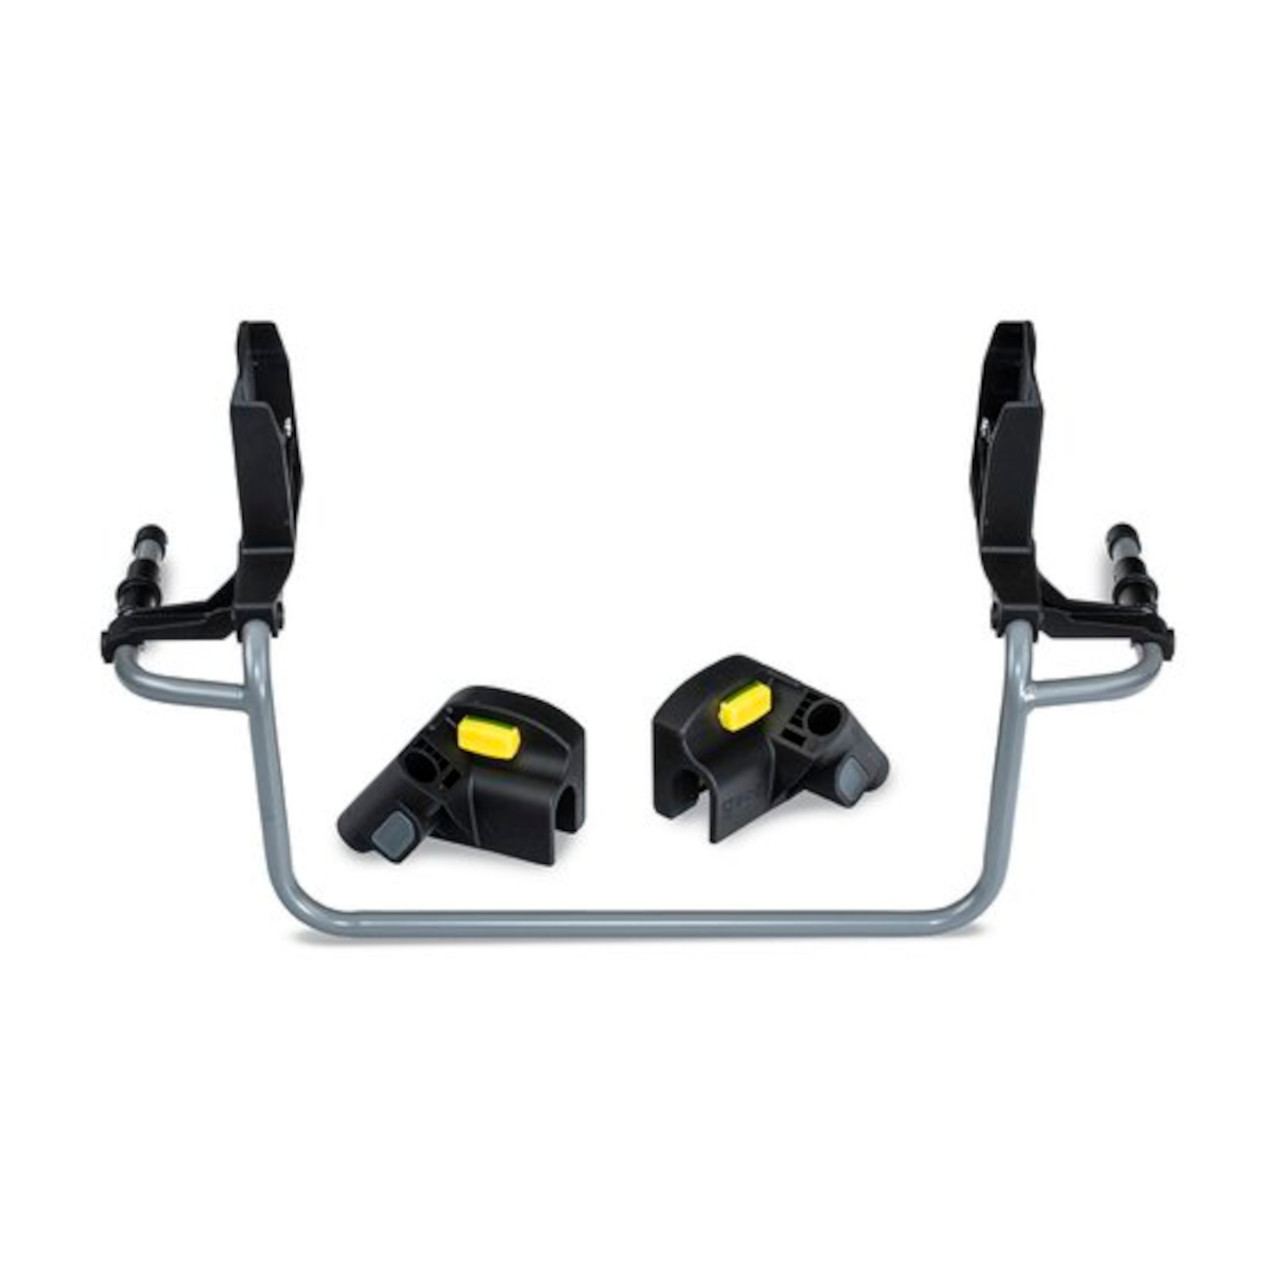 BOB Infant Car Seat Adapter S943900  (with receiver adapters)